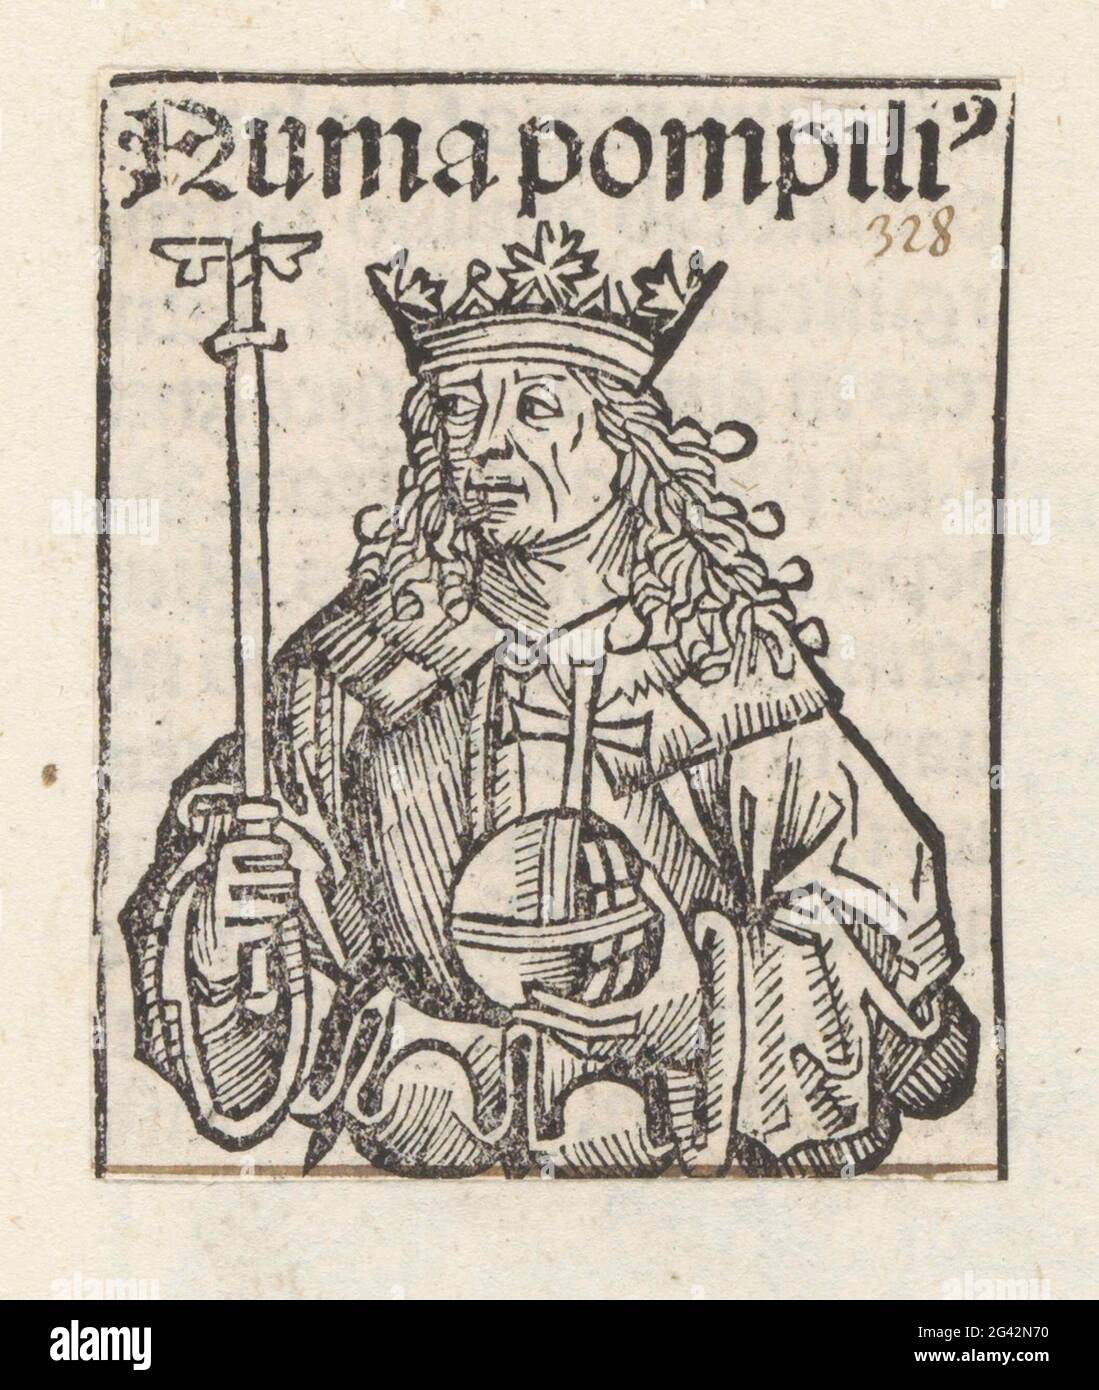 King Numa Pompilius; Numa Pompili [US]; Liber chronicarum. A flower celk with a king, turned his head to the left. He has a scepter and rich cone in his hands. The show is part of the sequence Roman kings in the Liber Chronicarum. The text identifies the man as Numa Pompilius. The print is part of an album. Stock Photo